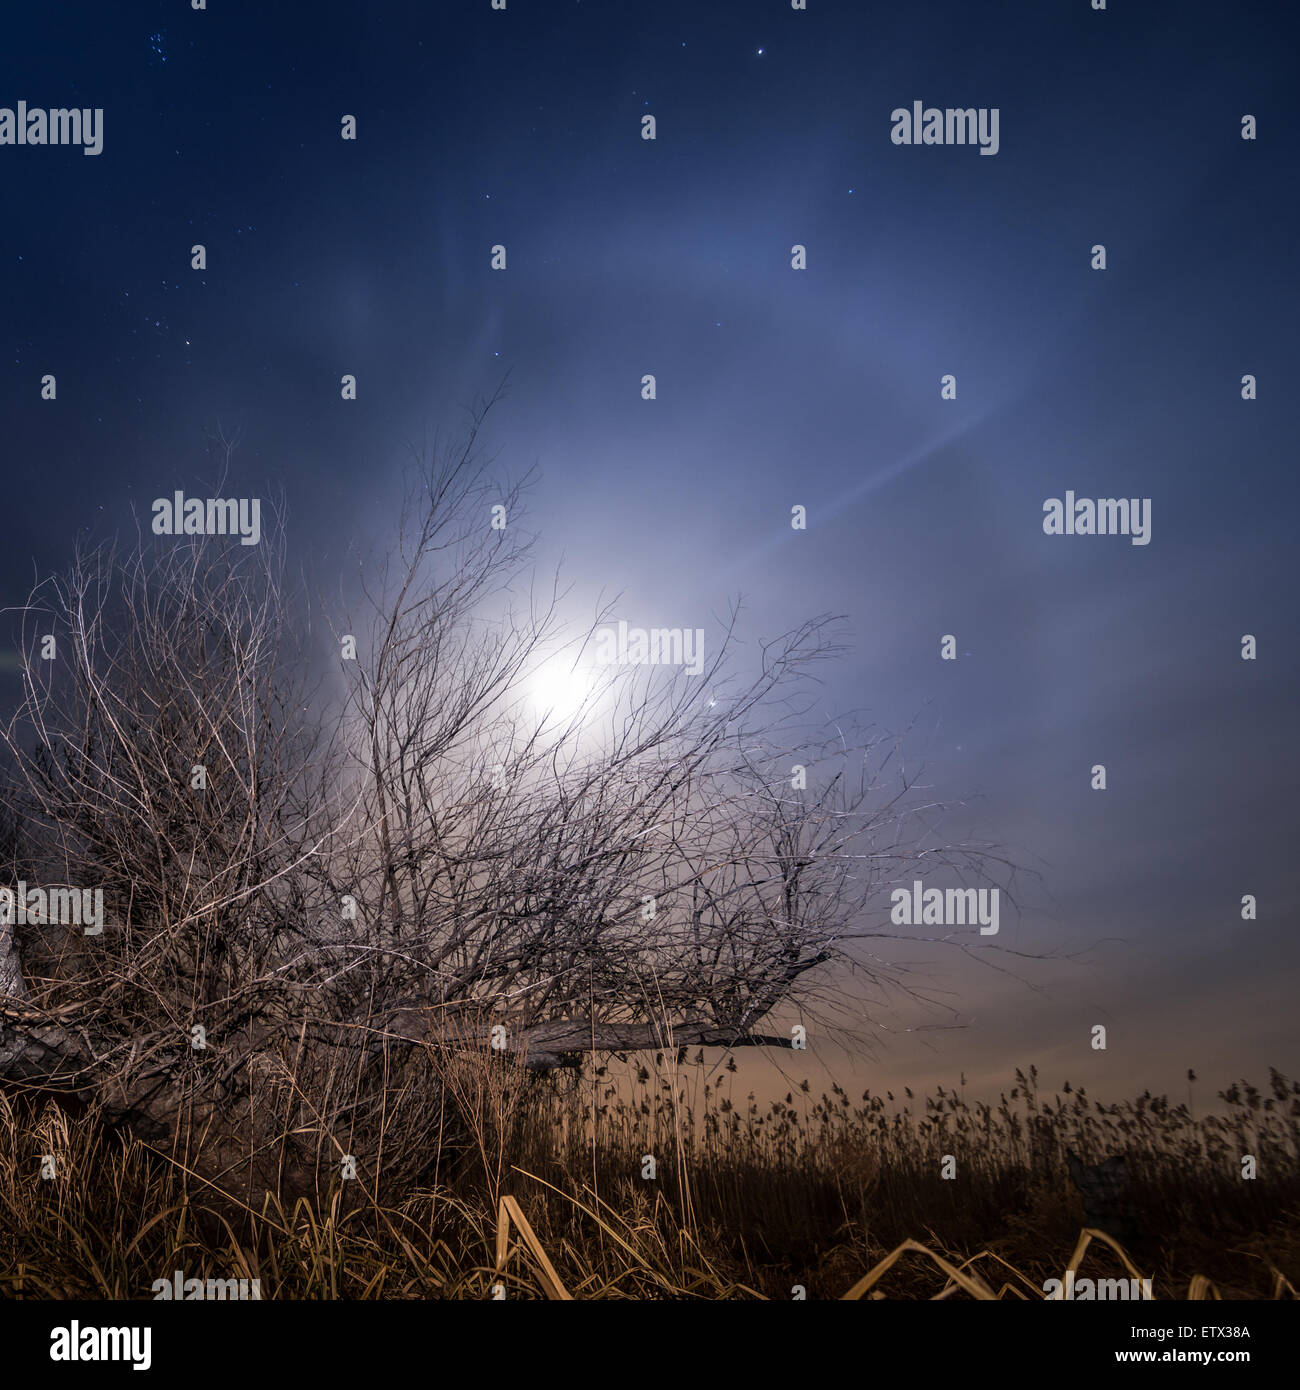 Chasing the moon - night full moon mystical landscape background Stock Photo